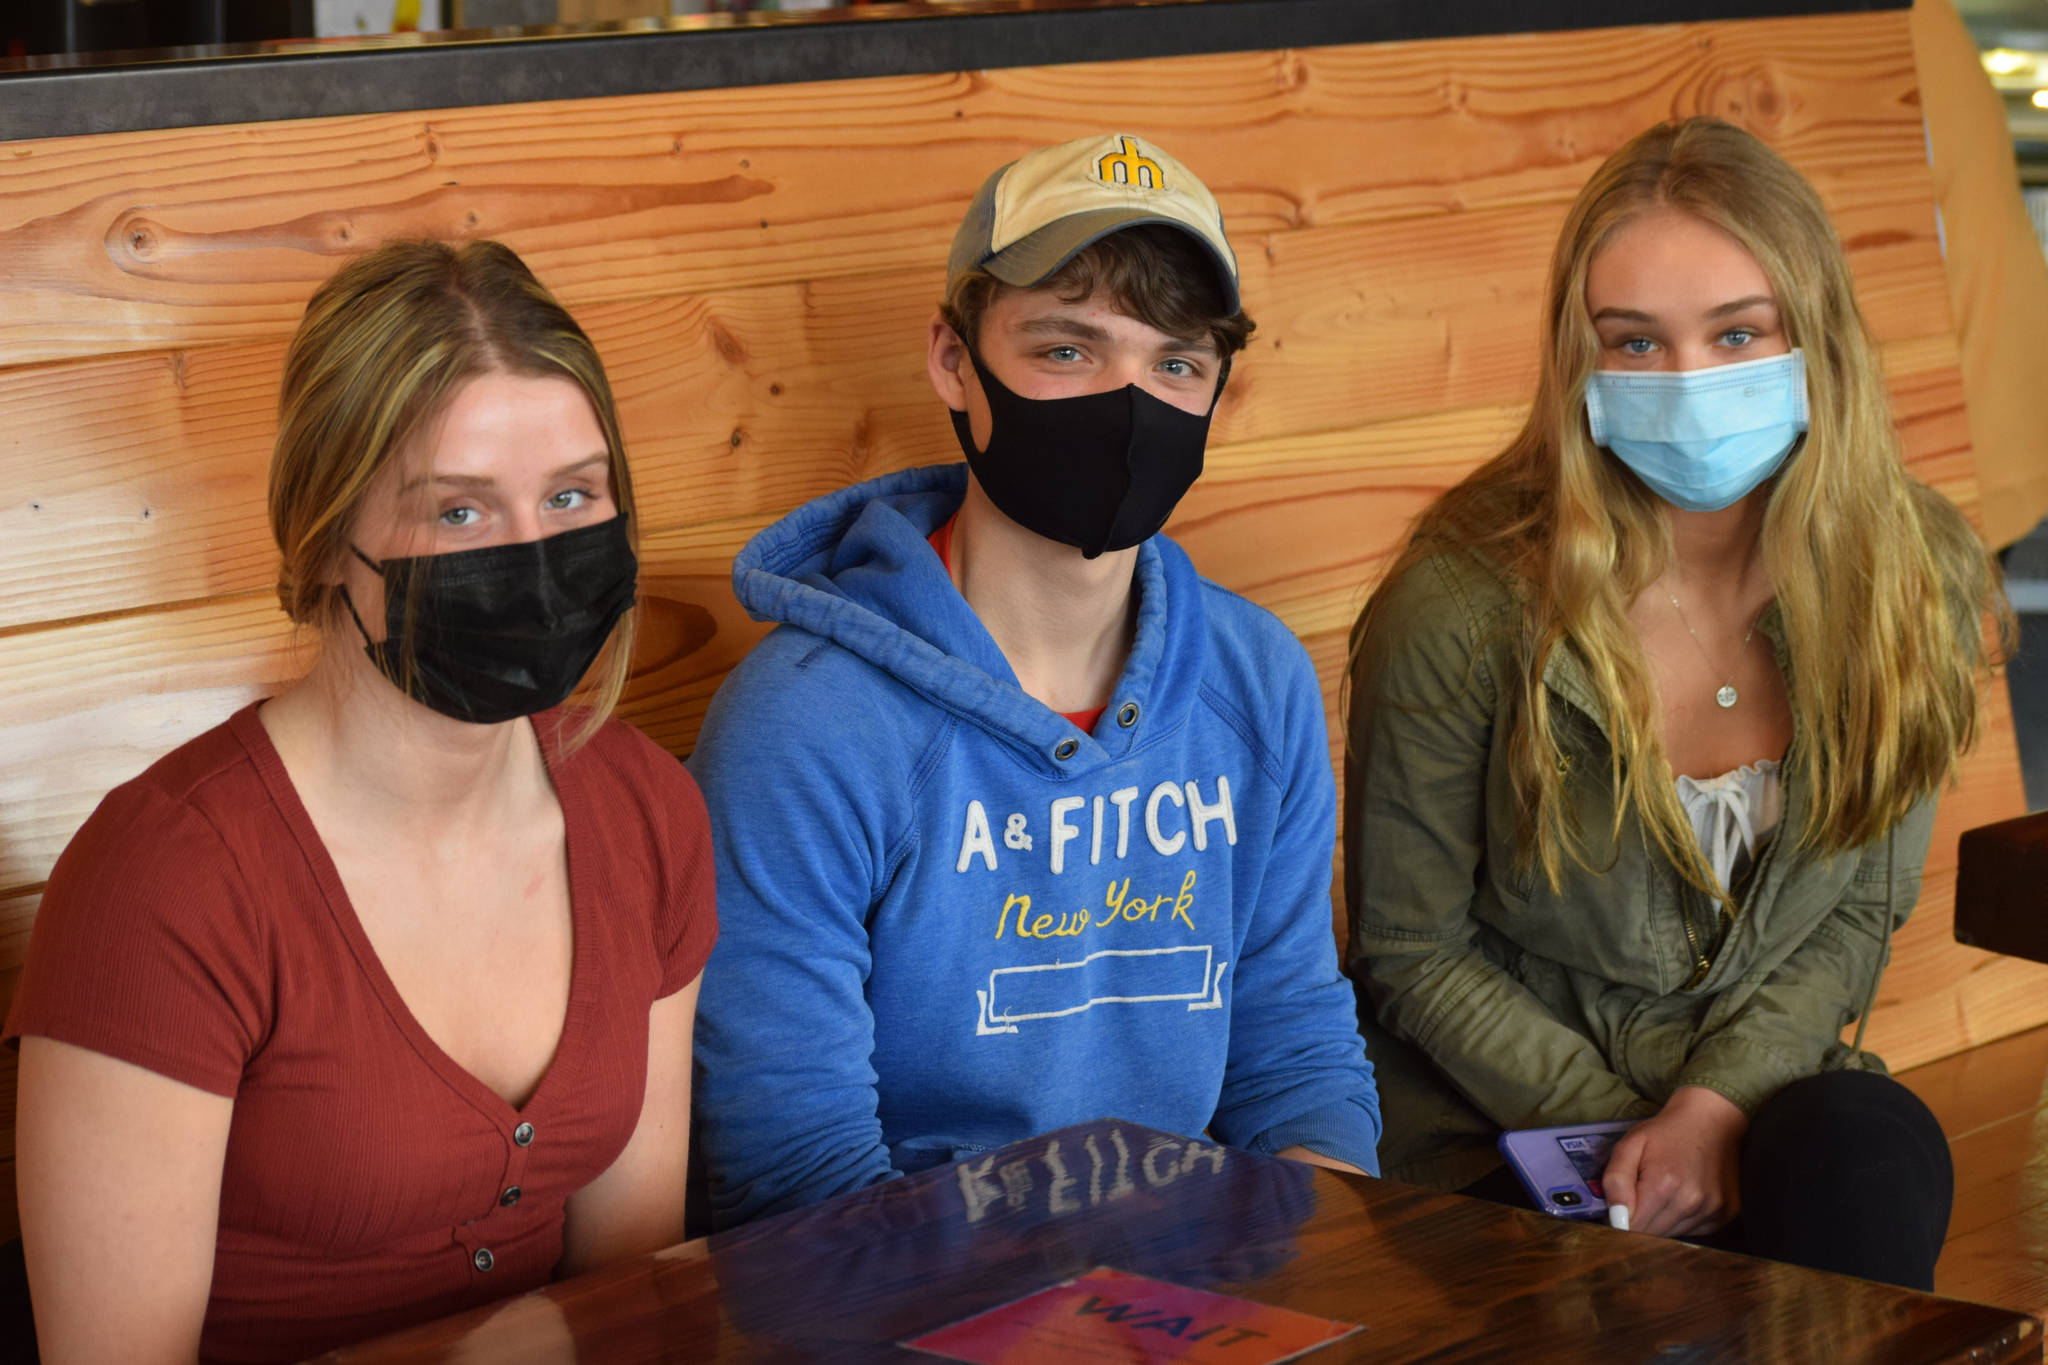 From left to right: Rhys Cannava, 16, Quinn Cox, 17, and Jolie Widaman, 16, are pictured here in Soldotna, Alaska on Thursday, April 15, 2021. The three Soldotna High School juniors got vaccinated against COVID-19 in March 2021. (Photo by Camille Botello/Peninsula Clarion)